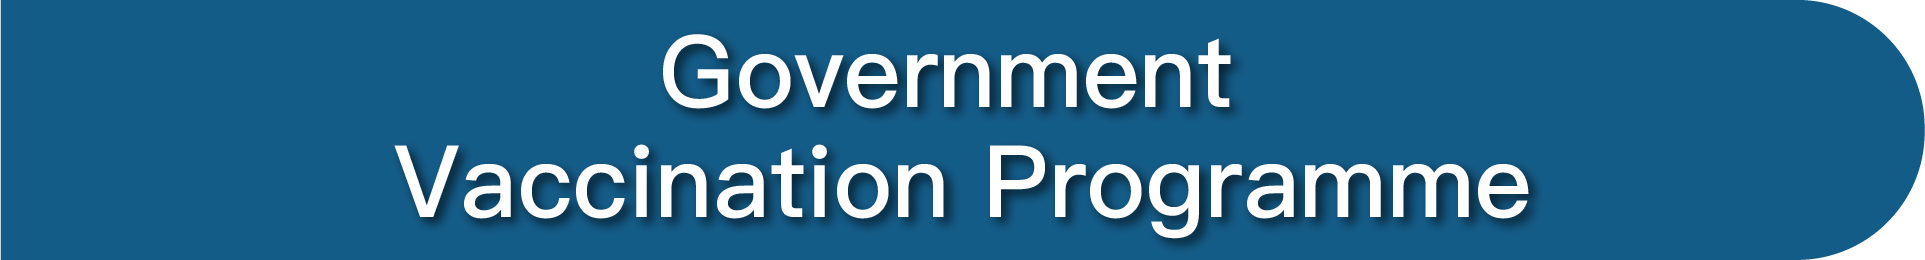 Government Vaccination Programme